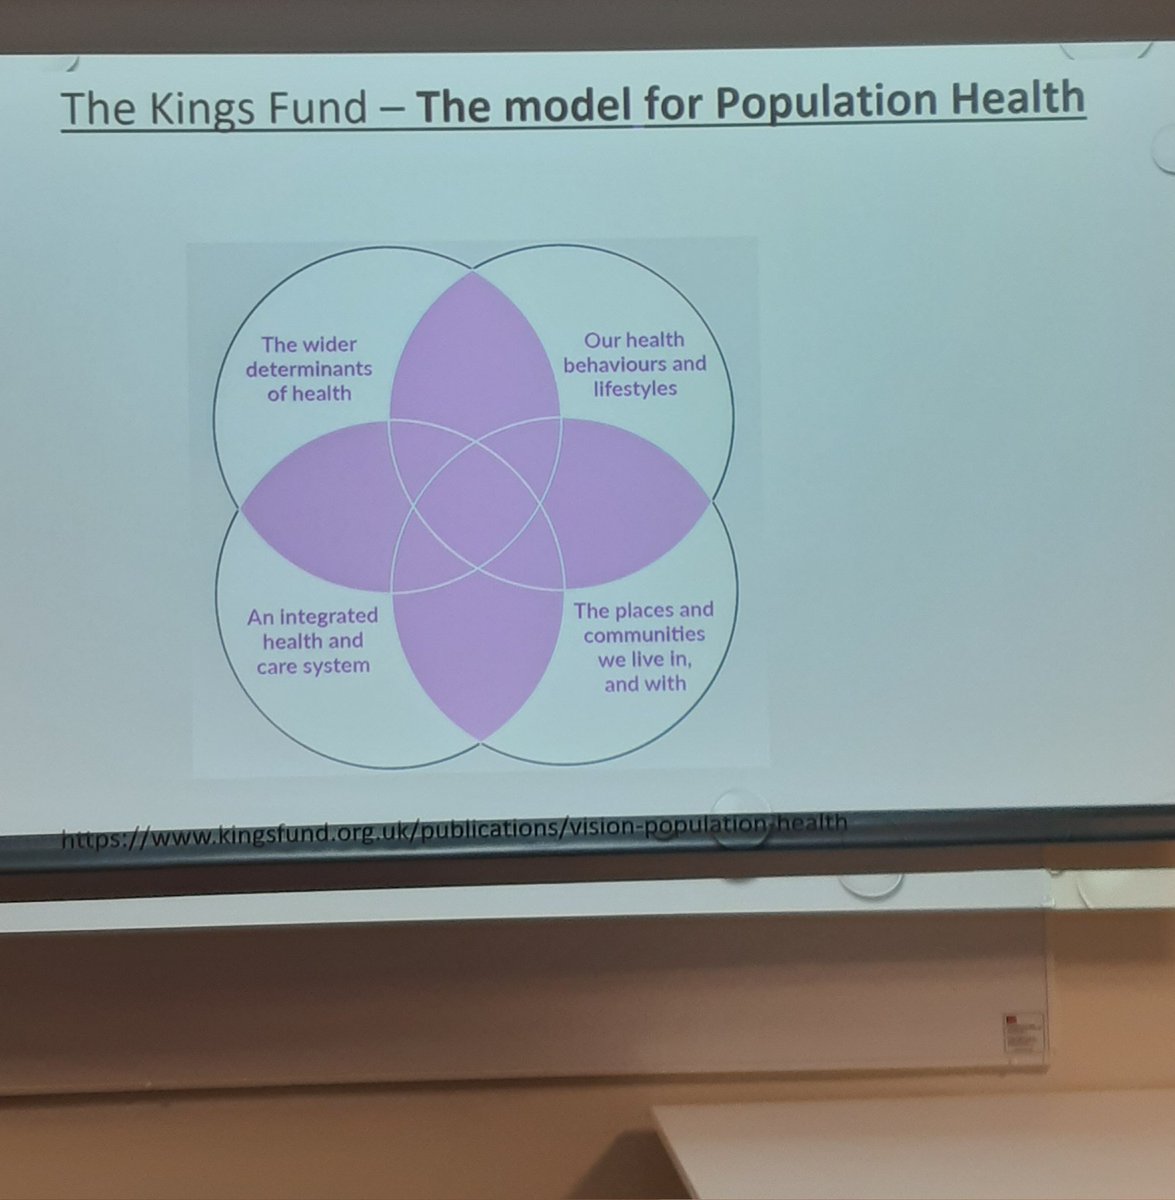 Great to be back teaching FCP Physios @ahpshu. Important subjects covered & very interesting discussion @Lewis_ACP @PCWT_hub #healthineqalities #populationhealth #prevention @AHPs4PH & @fairhealthuk podcasts referenced 👍